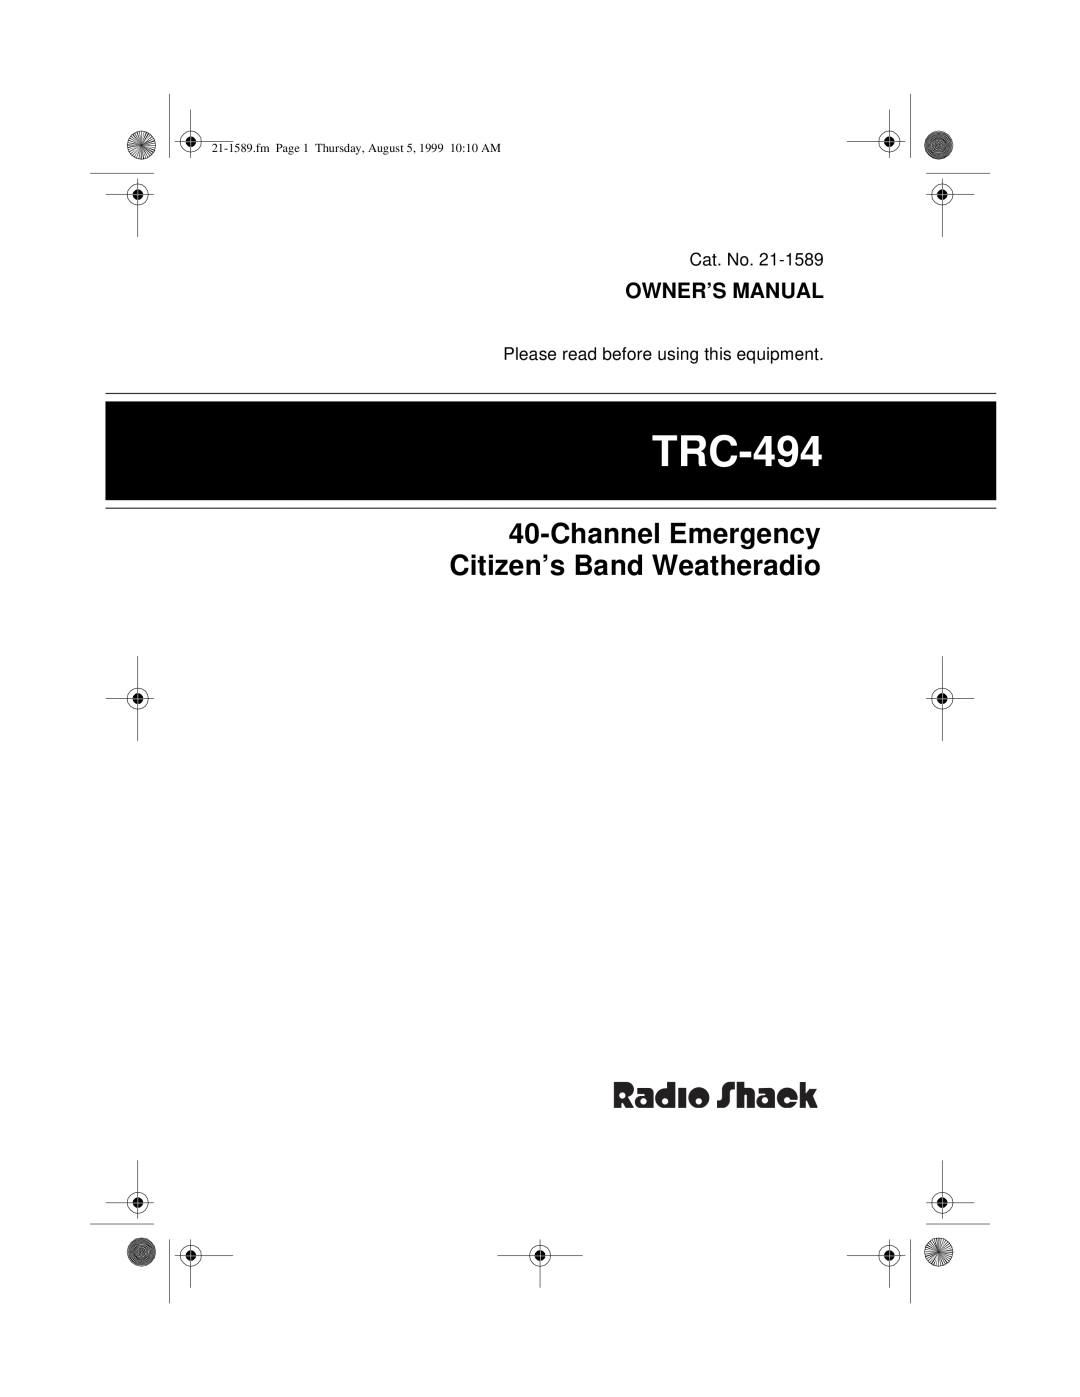 Radio Shack TRC-494 owner manual Channel Emergency Citizen’s Band Weatheradio, Owner’S Manual 